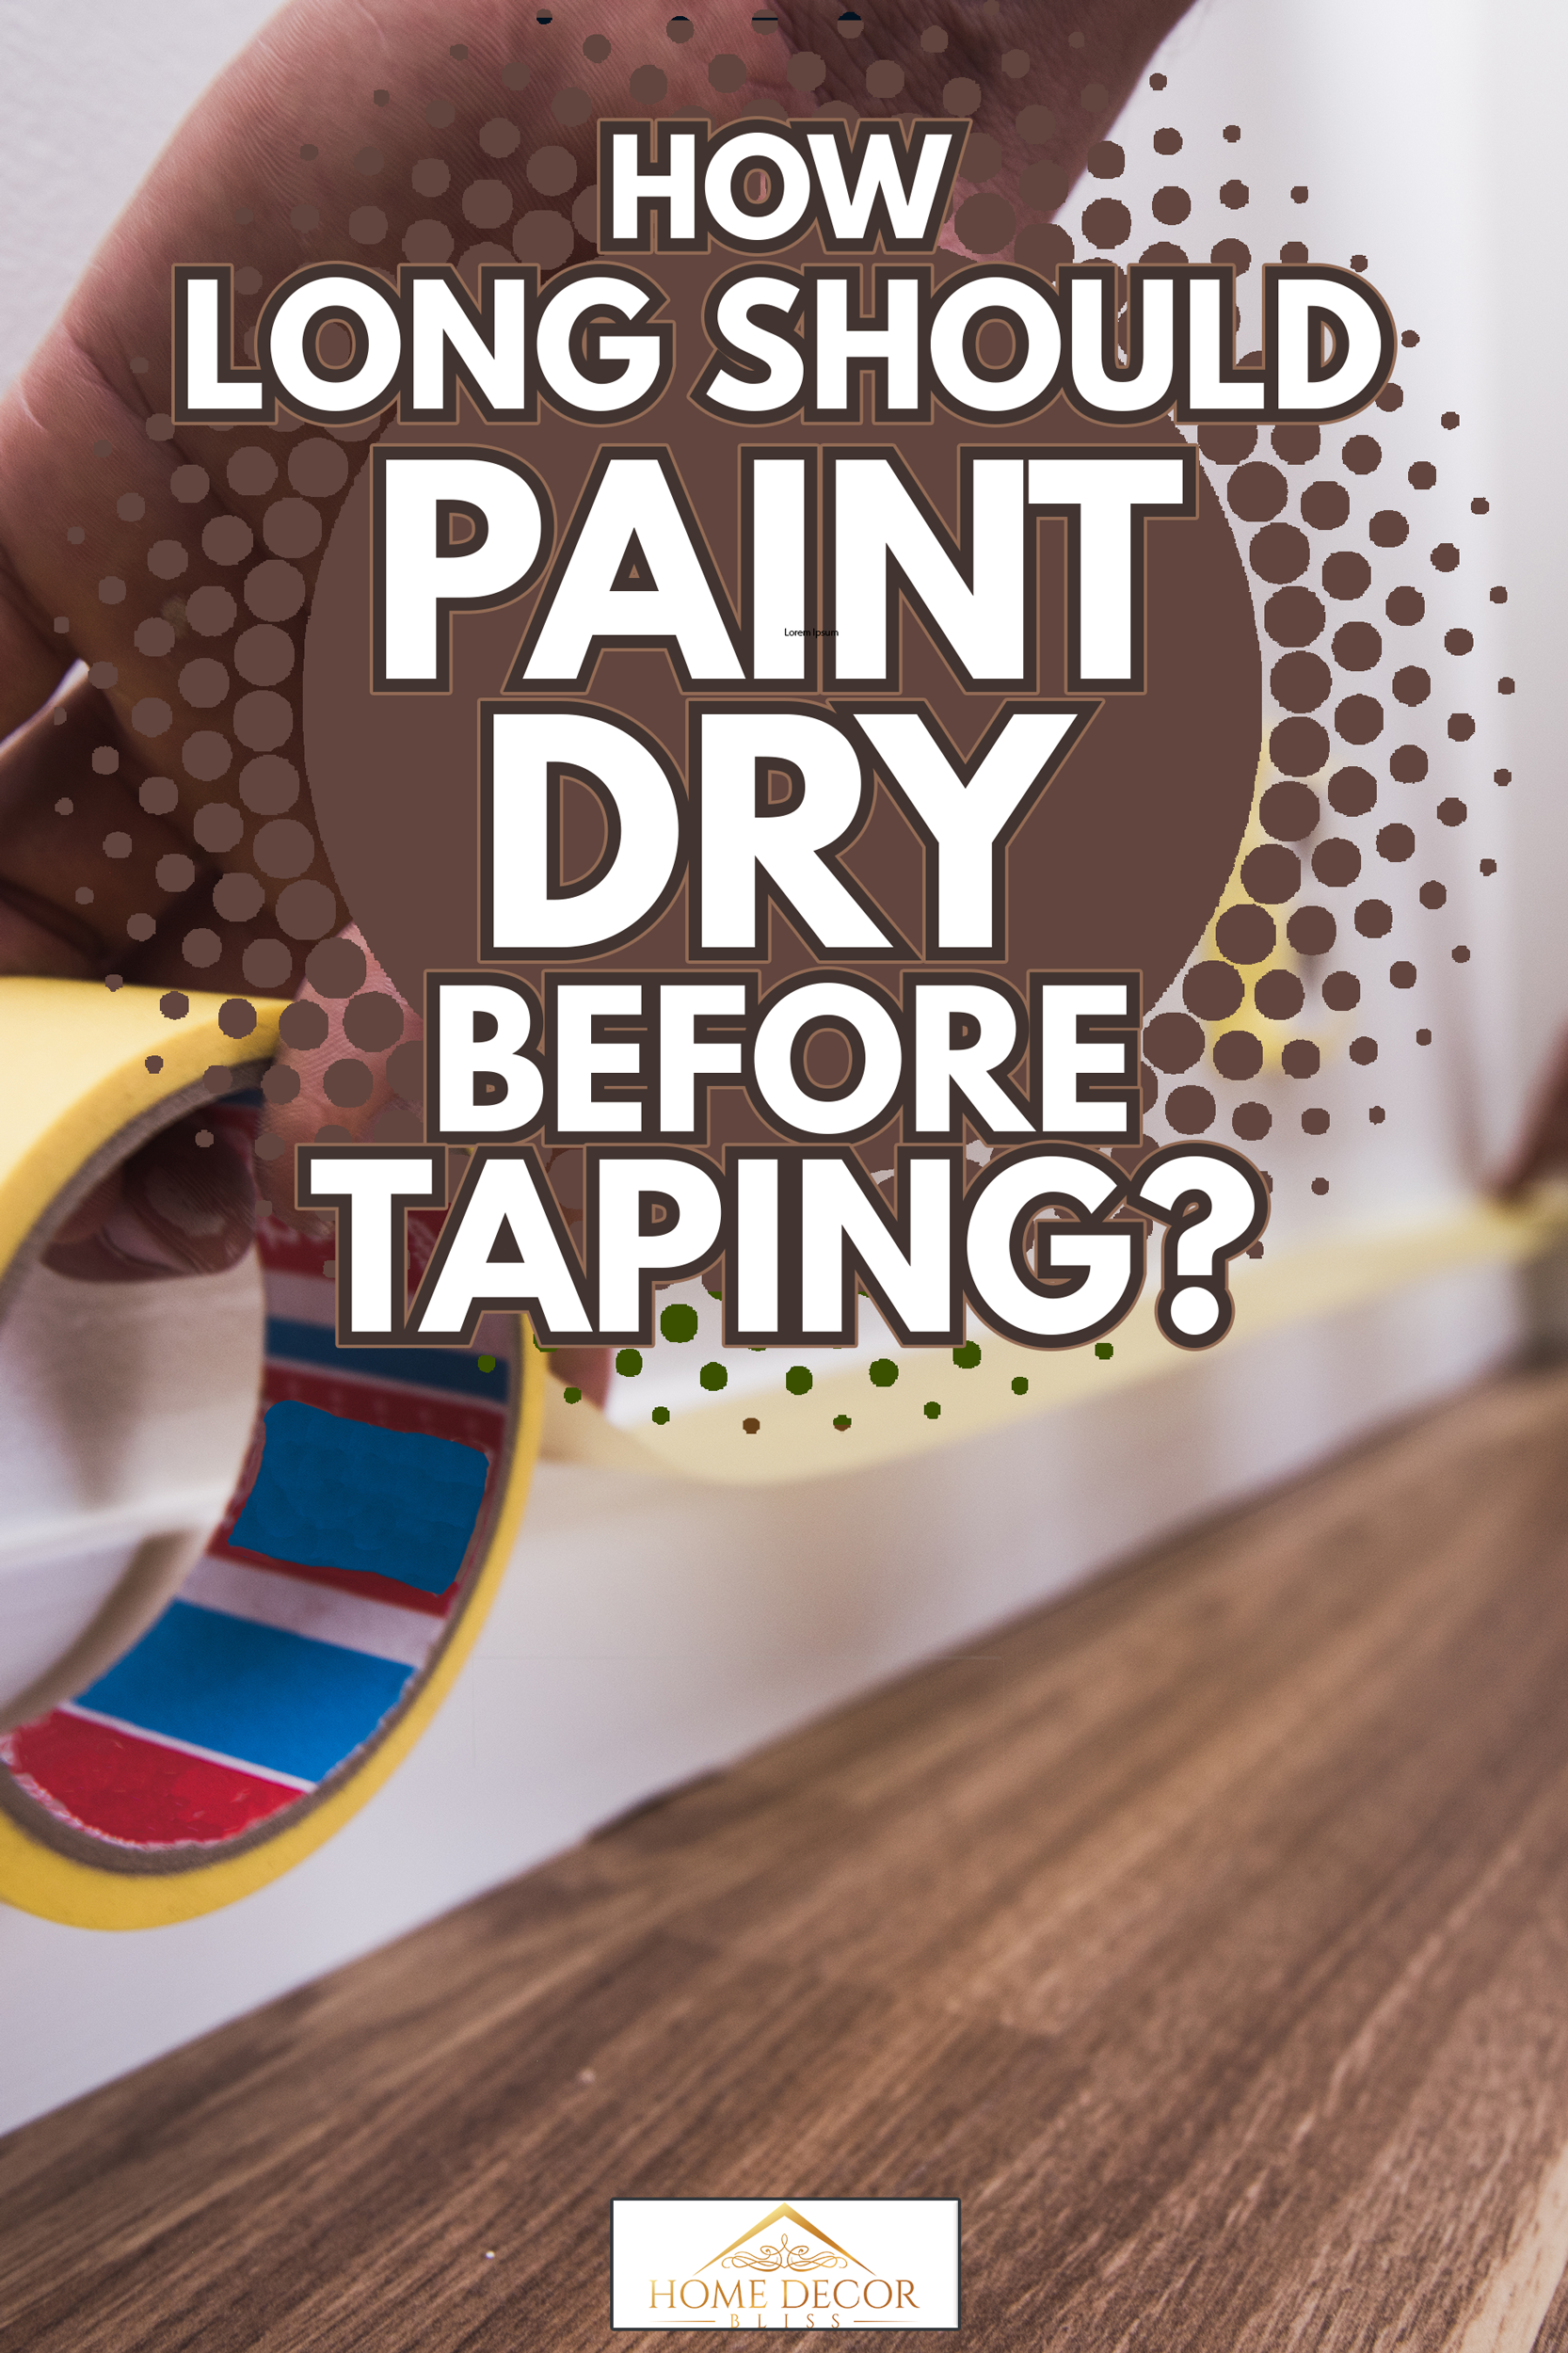 Professional painter preparing for work - How Long Should Paint Dry Before Taping